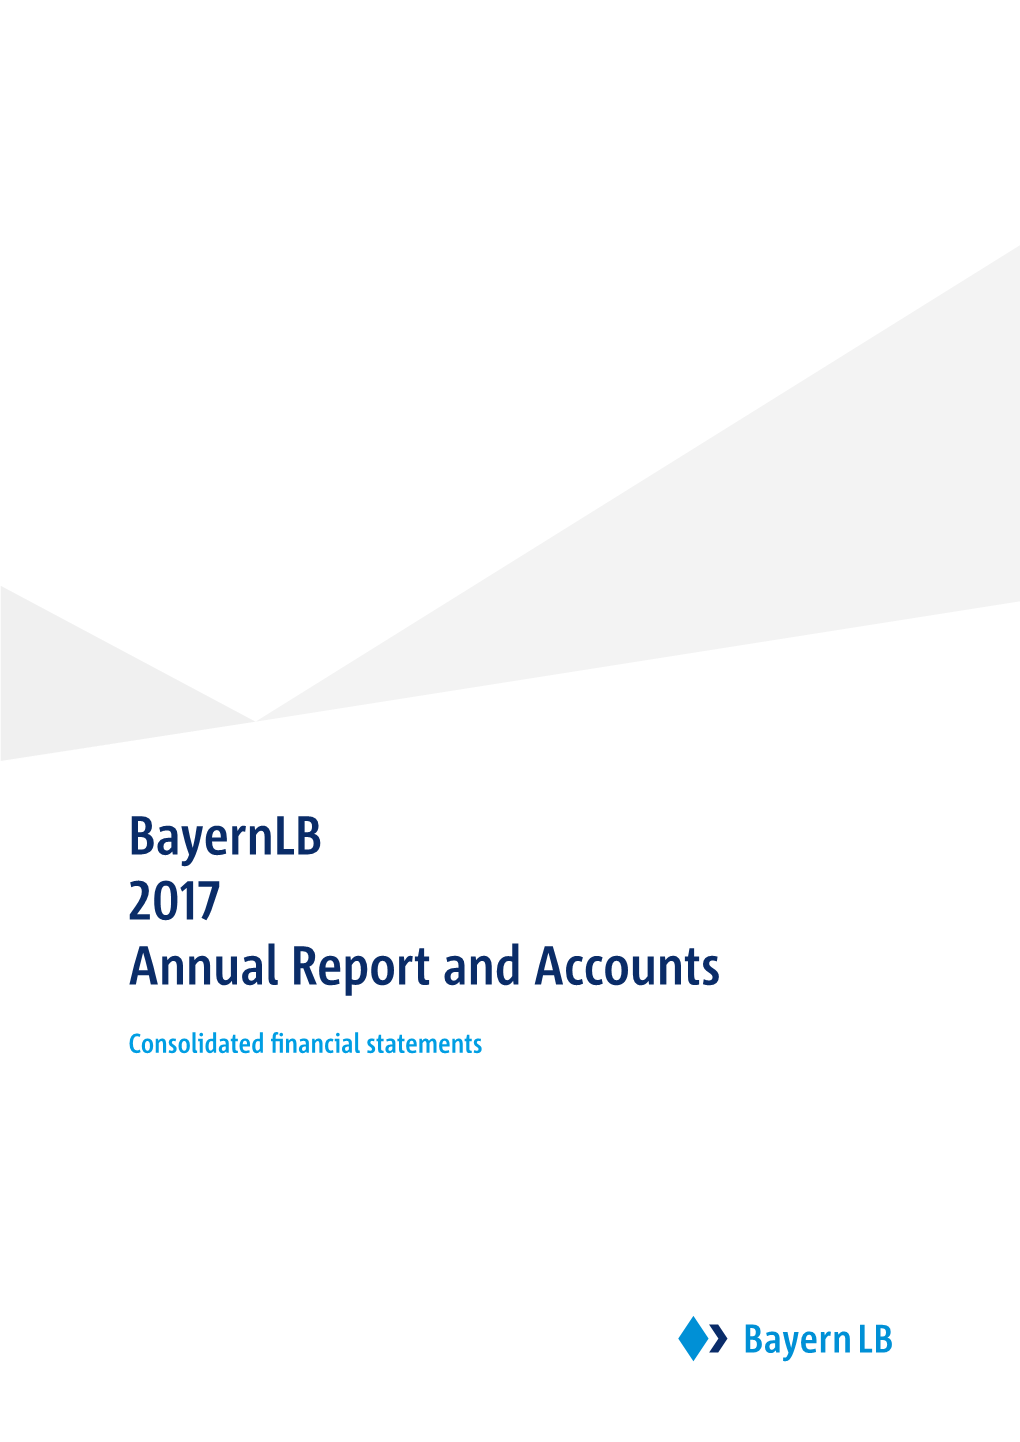 Bayernlb 2017 Annual Report and Accounts